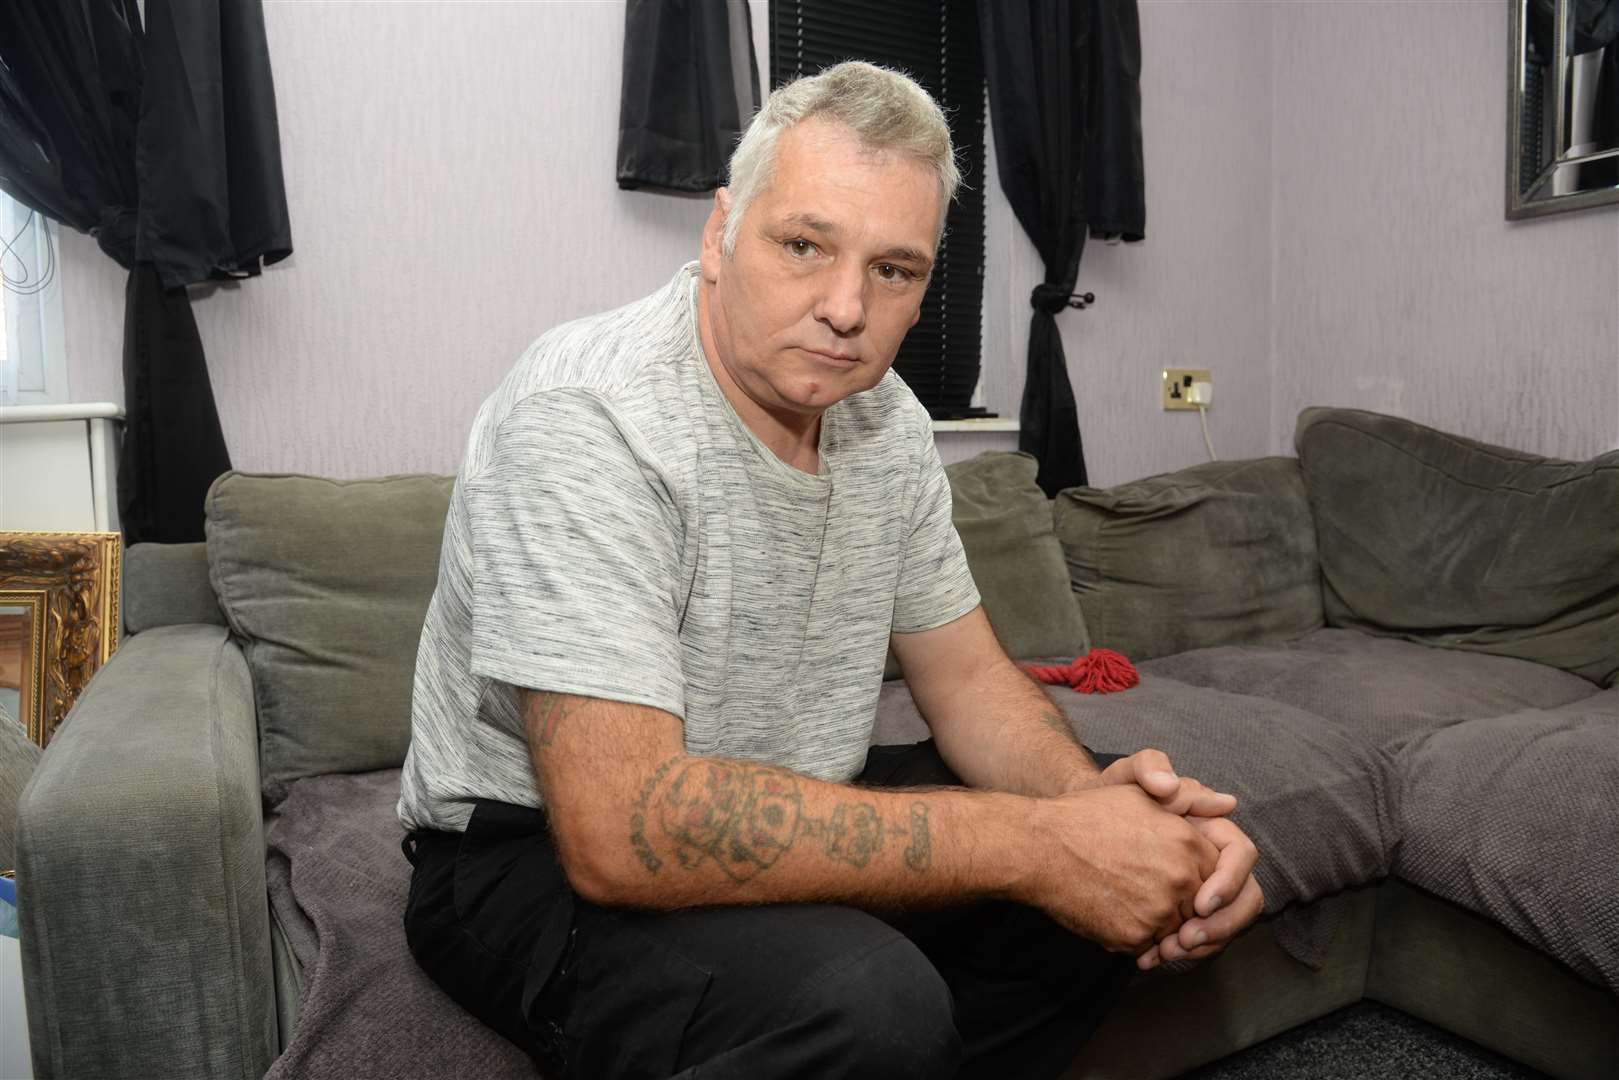 Tony Hannington of Herne Bay who was abused by his wife for three years